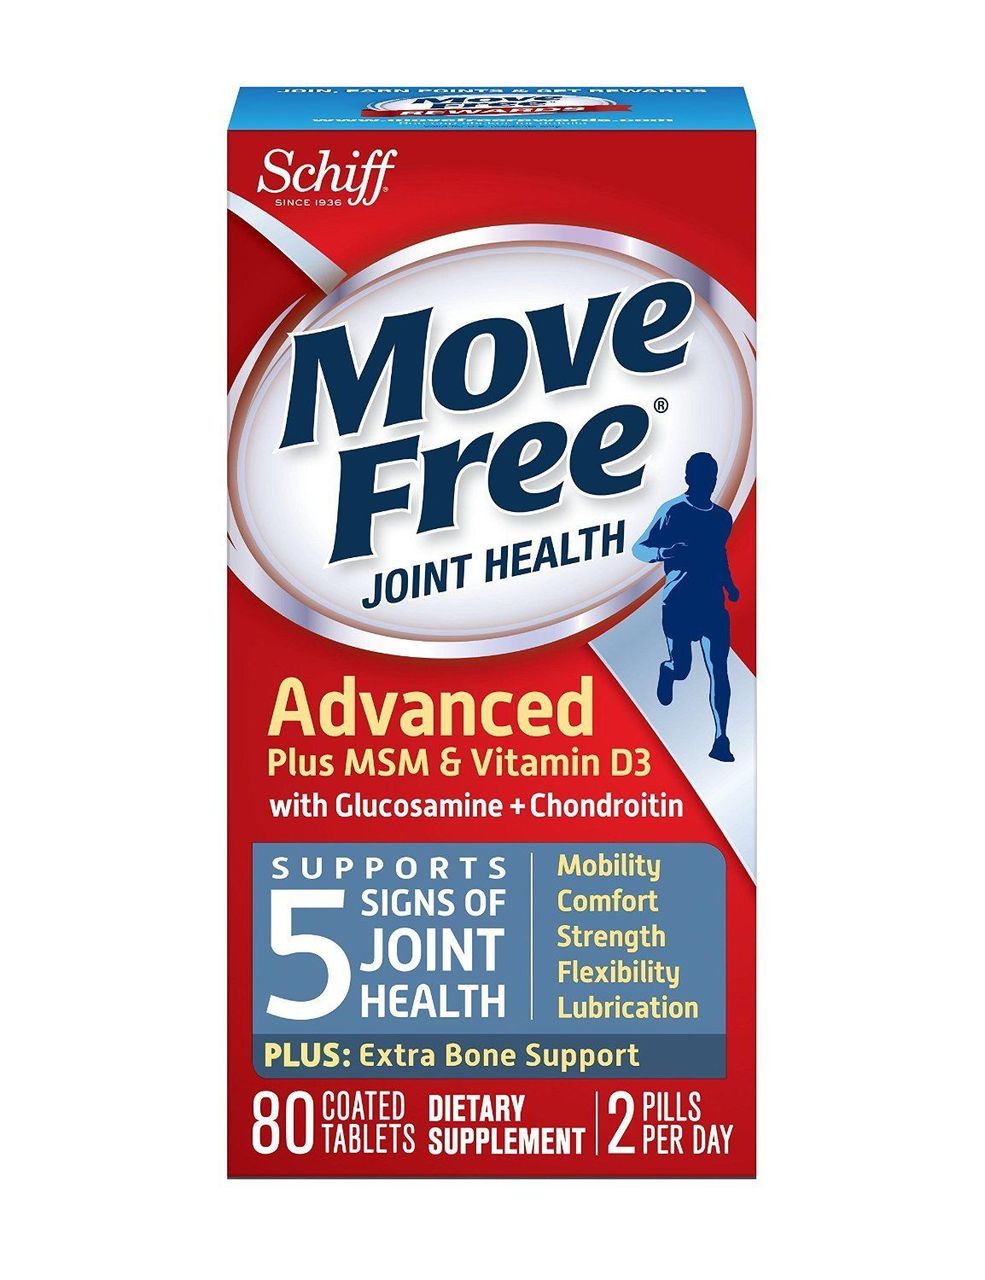 Move Free Advanced Plus MSM and Vitamin D3, 80 tablets - Joint Health  Supplement with Glucosamine and Chondroitin - DroneUp Delivery